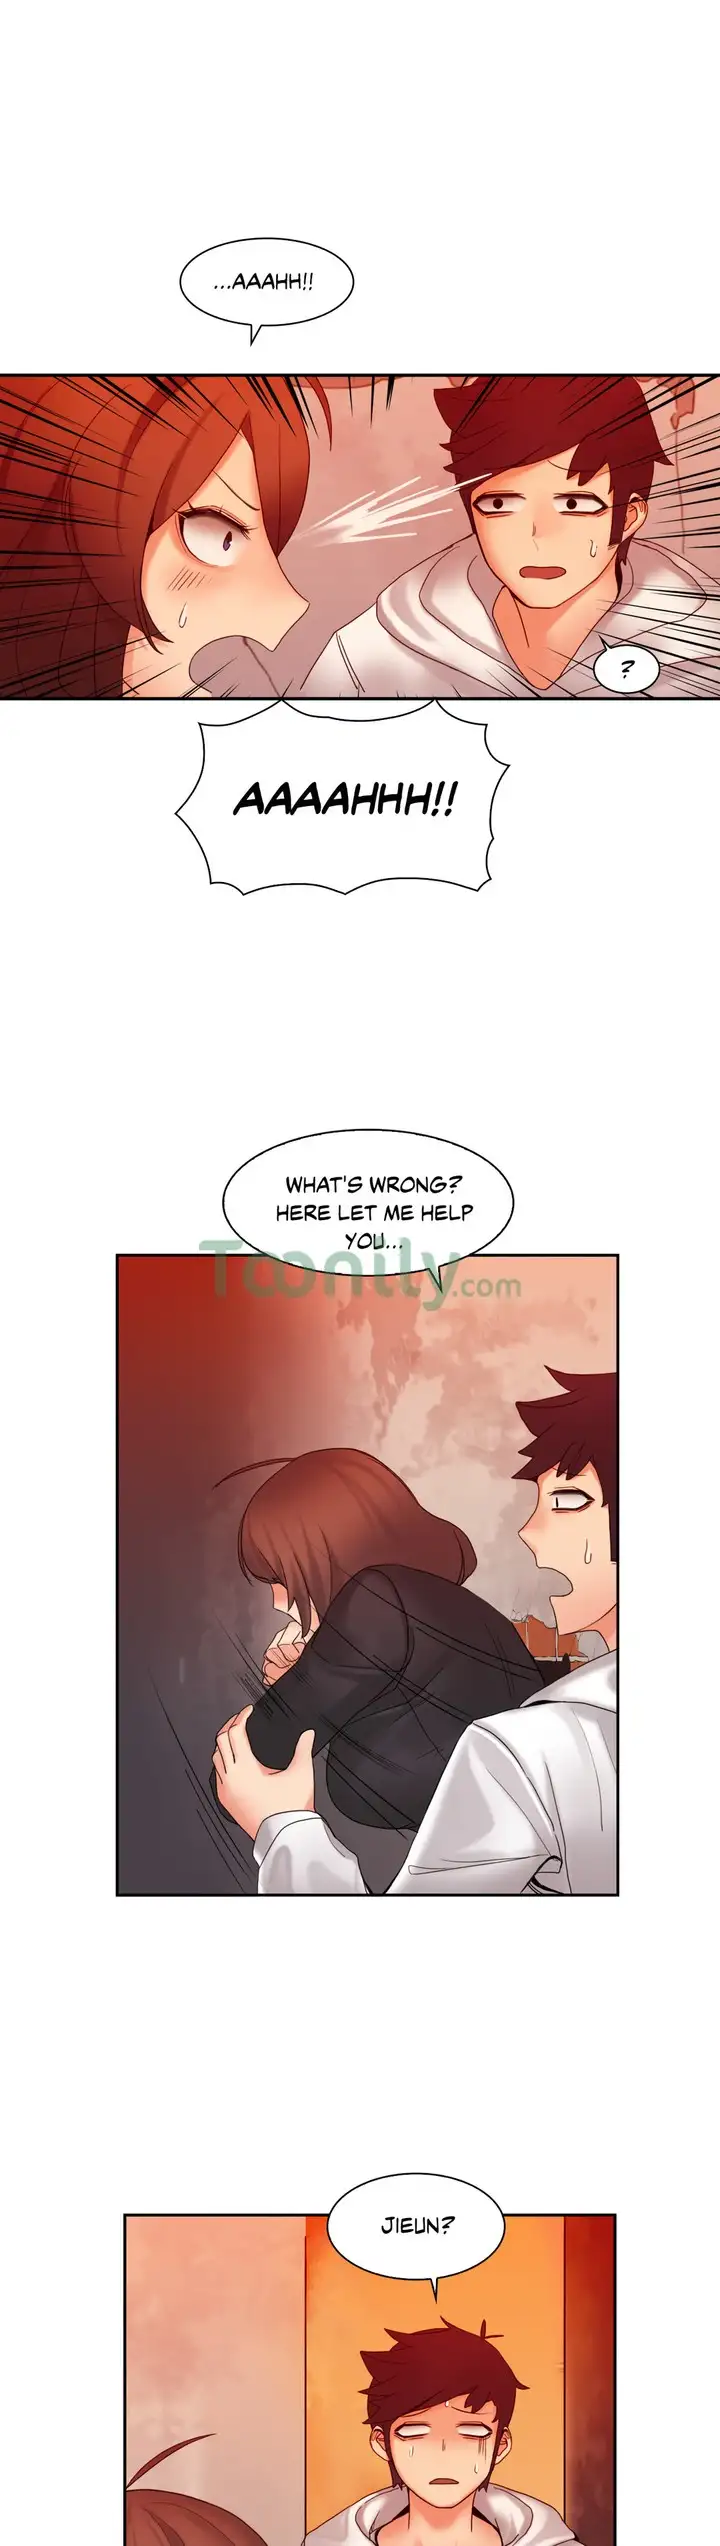 The Girl That Got Stuck in the Wall - Chapter 9 Page 3